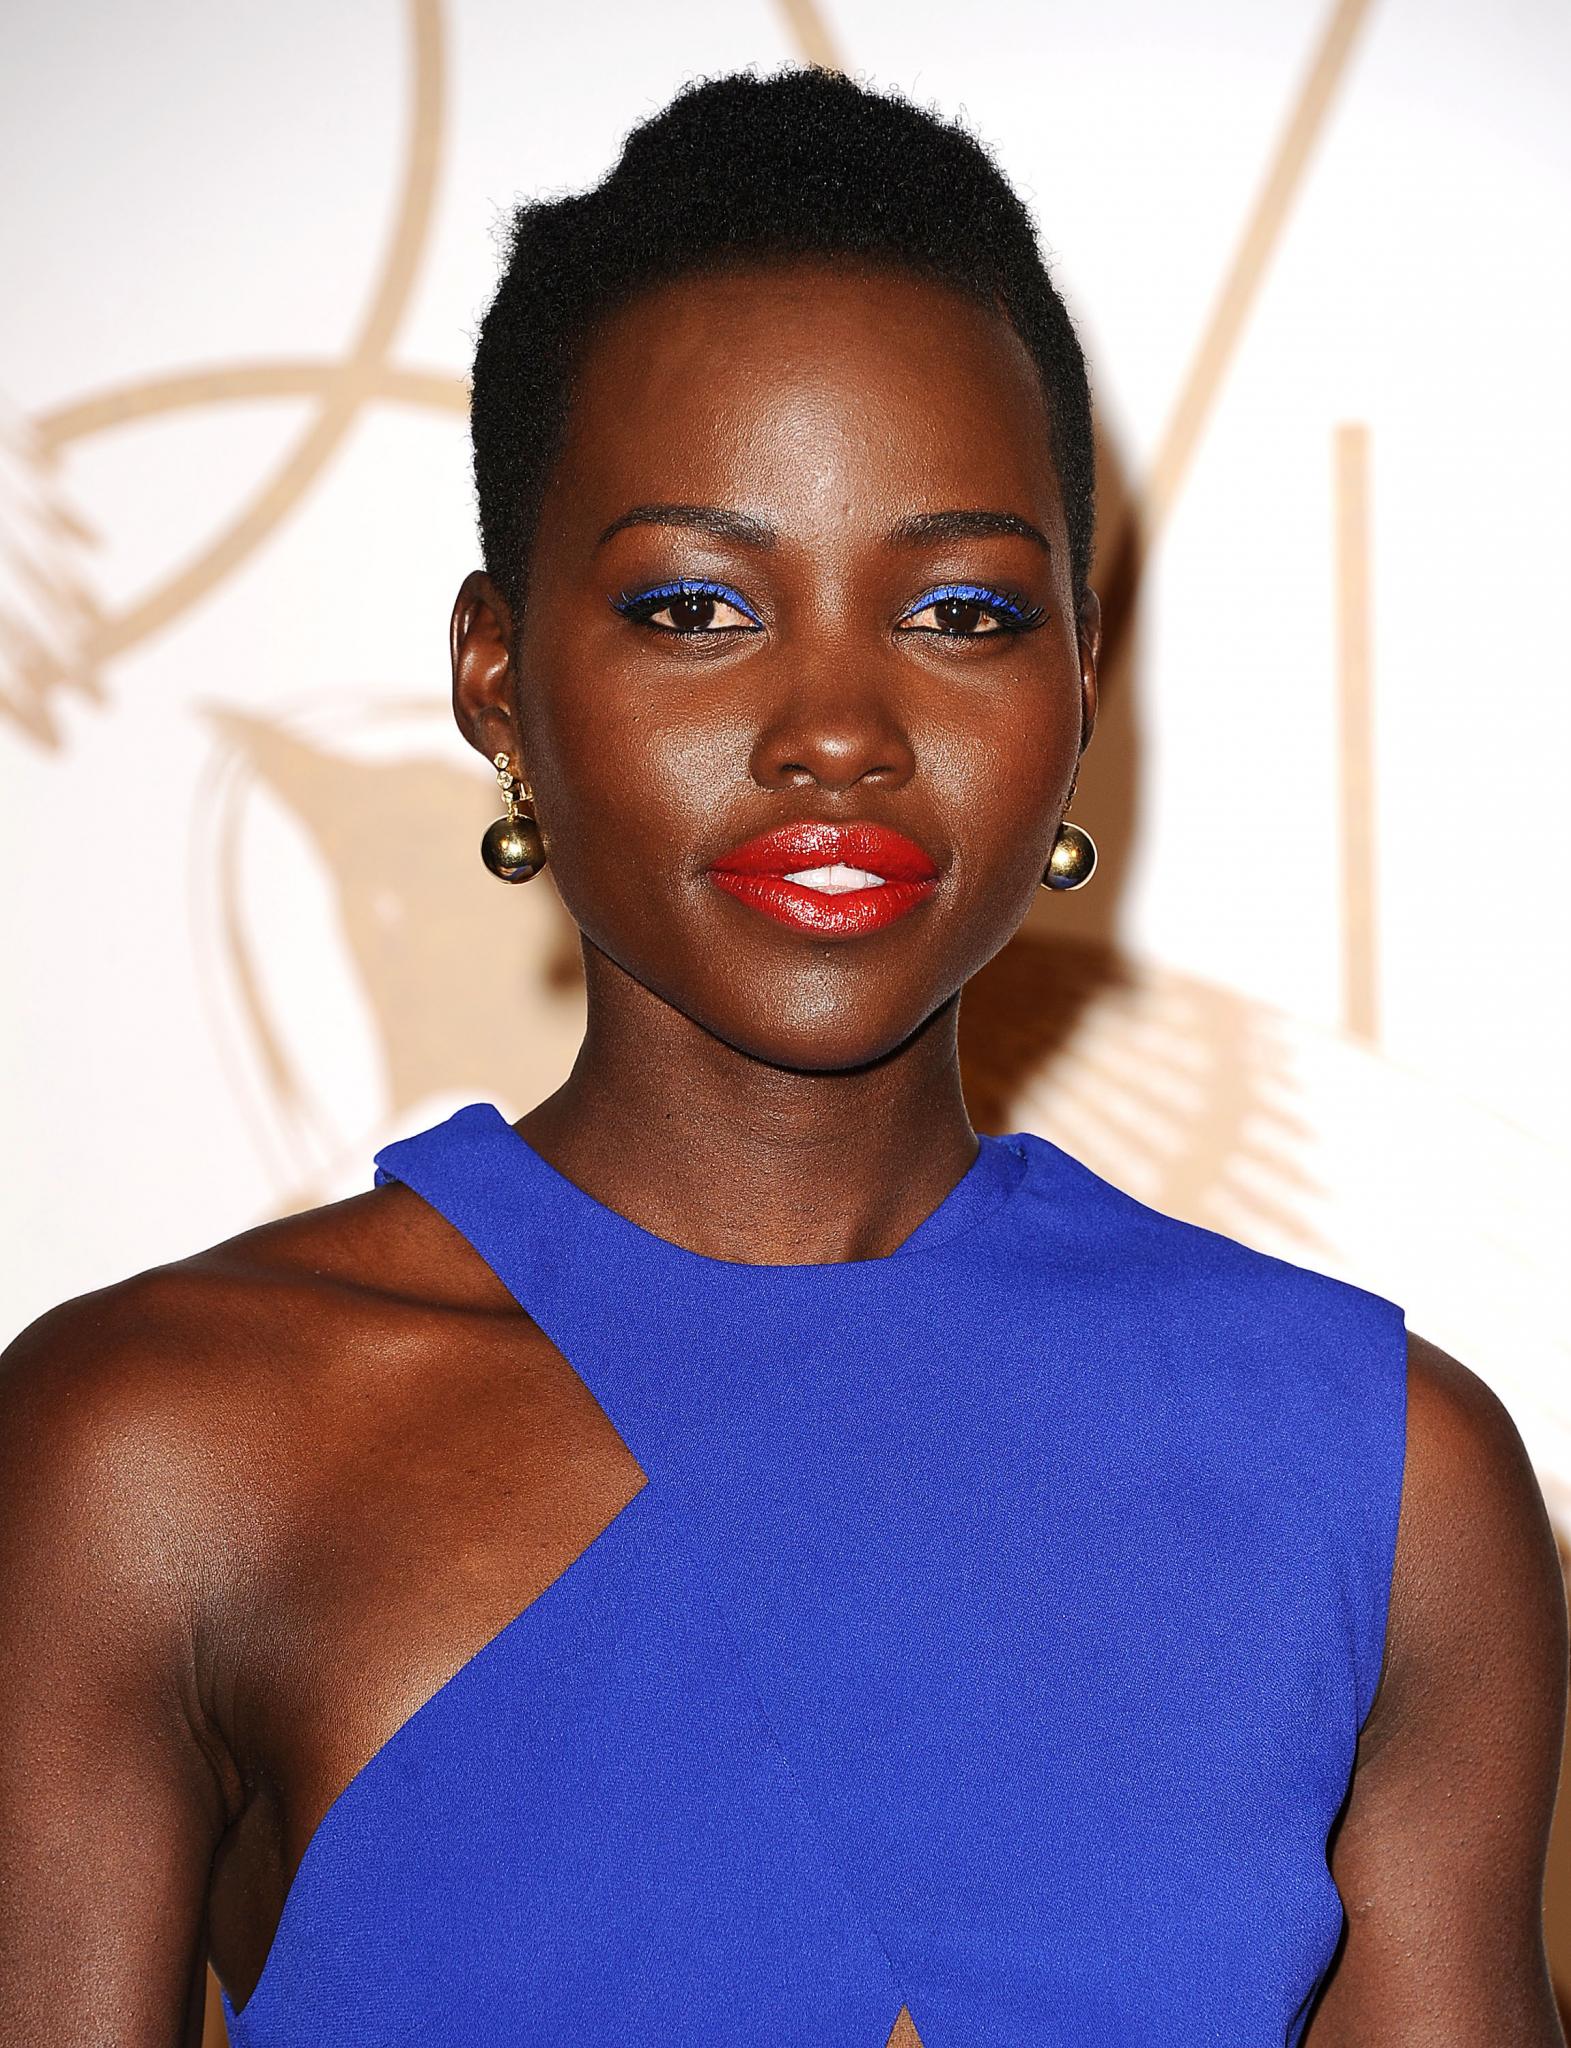 Is Lupita Nyong'o in the Running for 'Star Wars' Lead?
